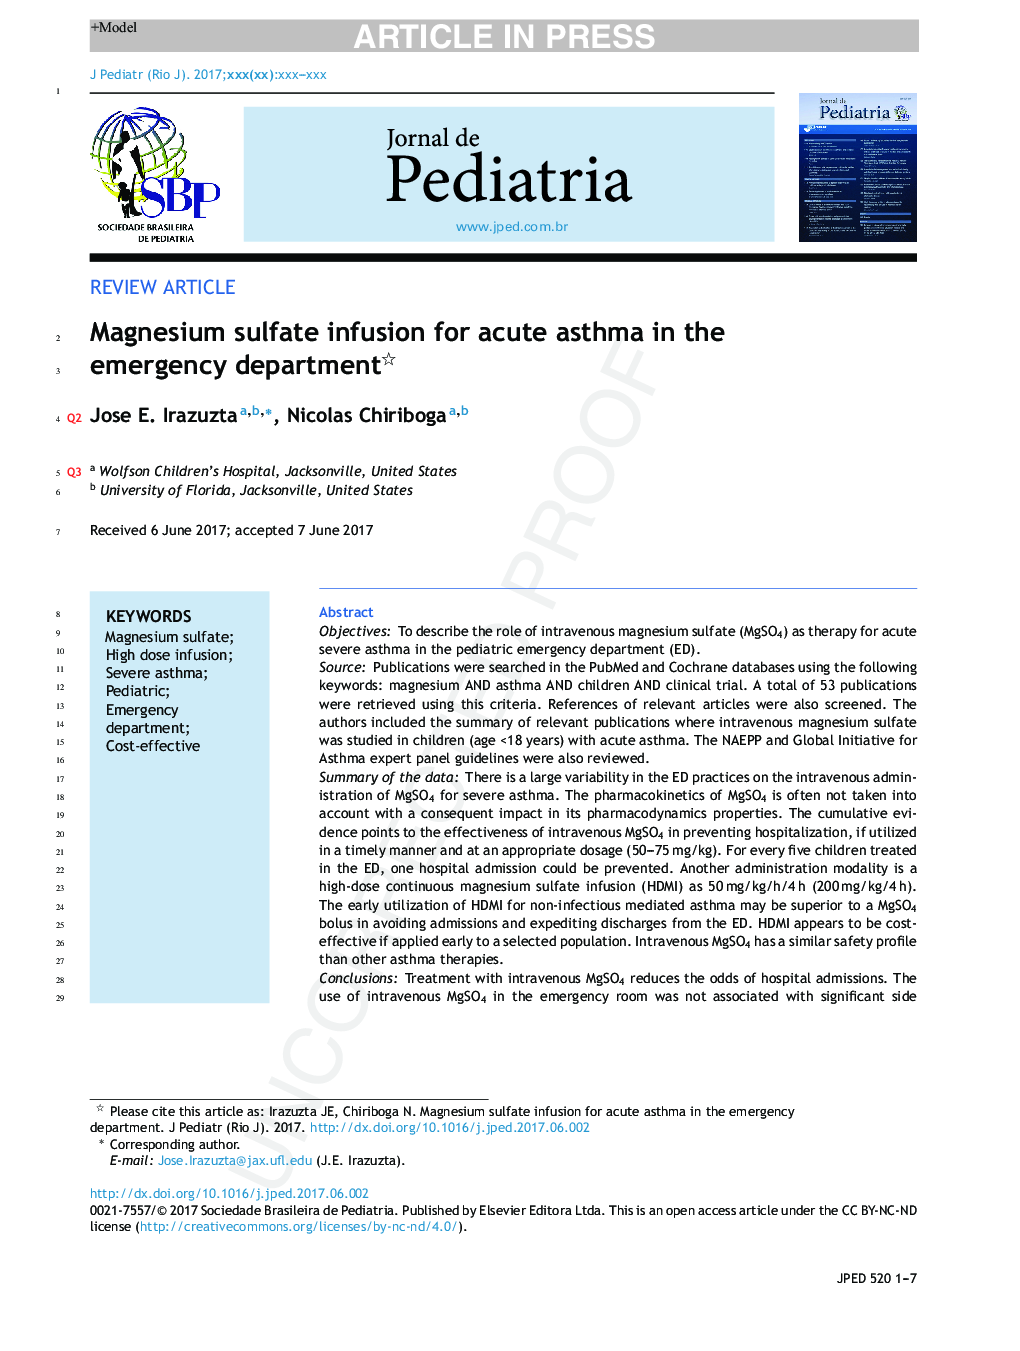 Magnesium sulfate infusion for acute asthma in the emergency department